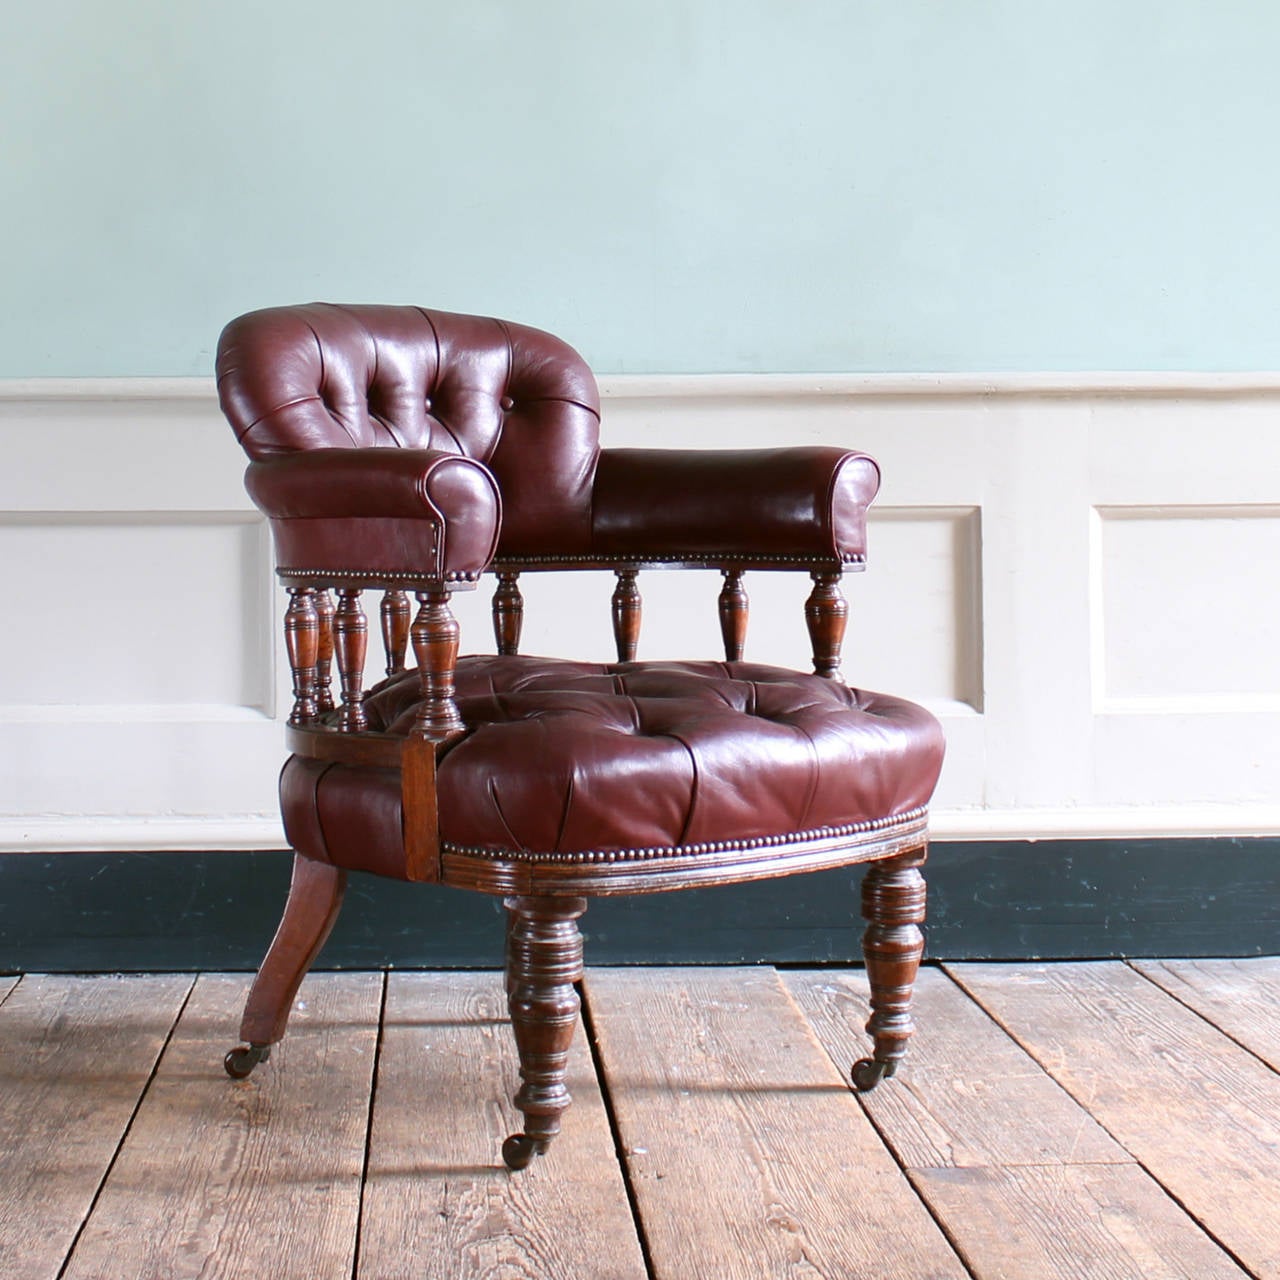 A Victorian leather button-back upholstered armchairs, ex. Fishmongers' Hall, London.

Sold separately (price is per chair). Available to view at Brunswick House, London.

84cm (33